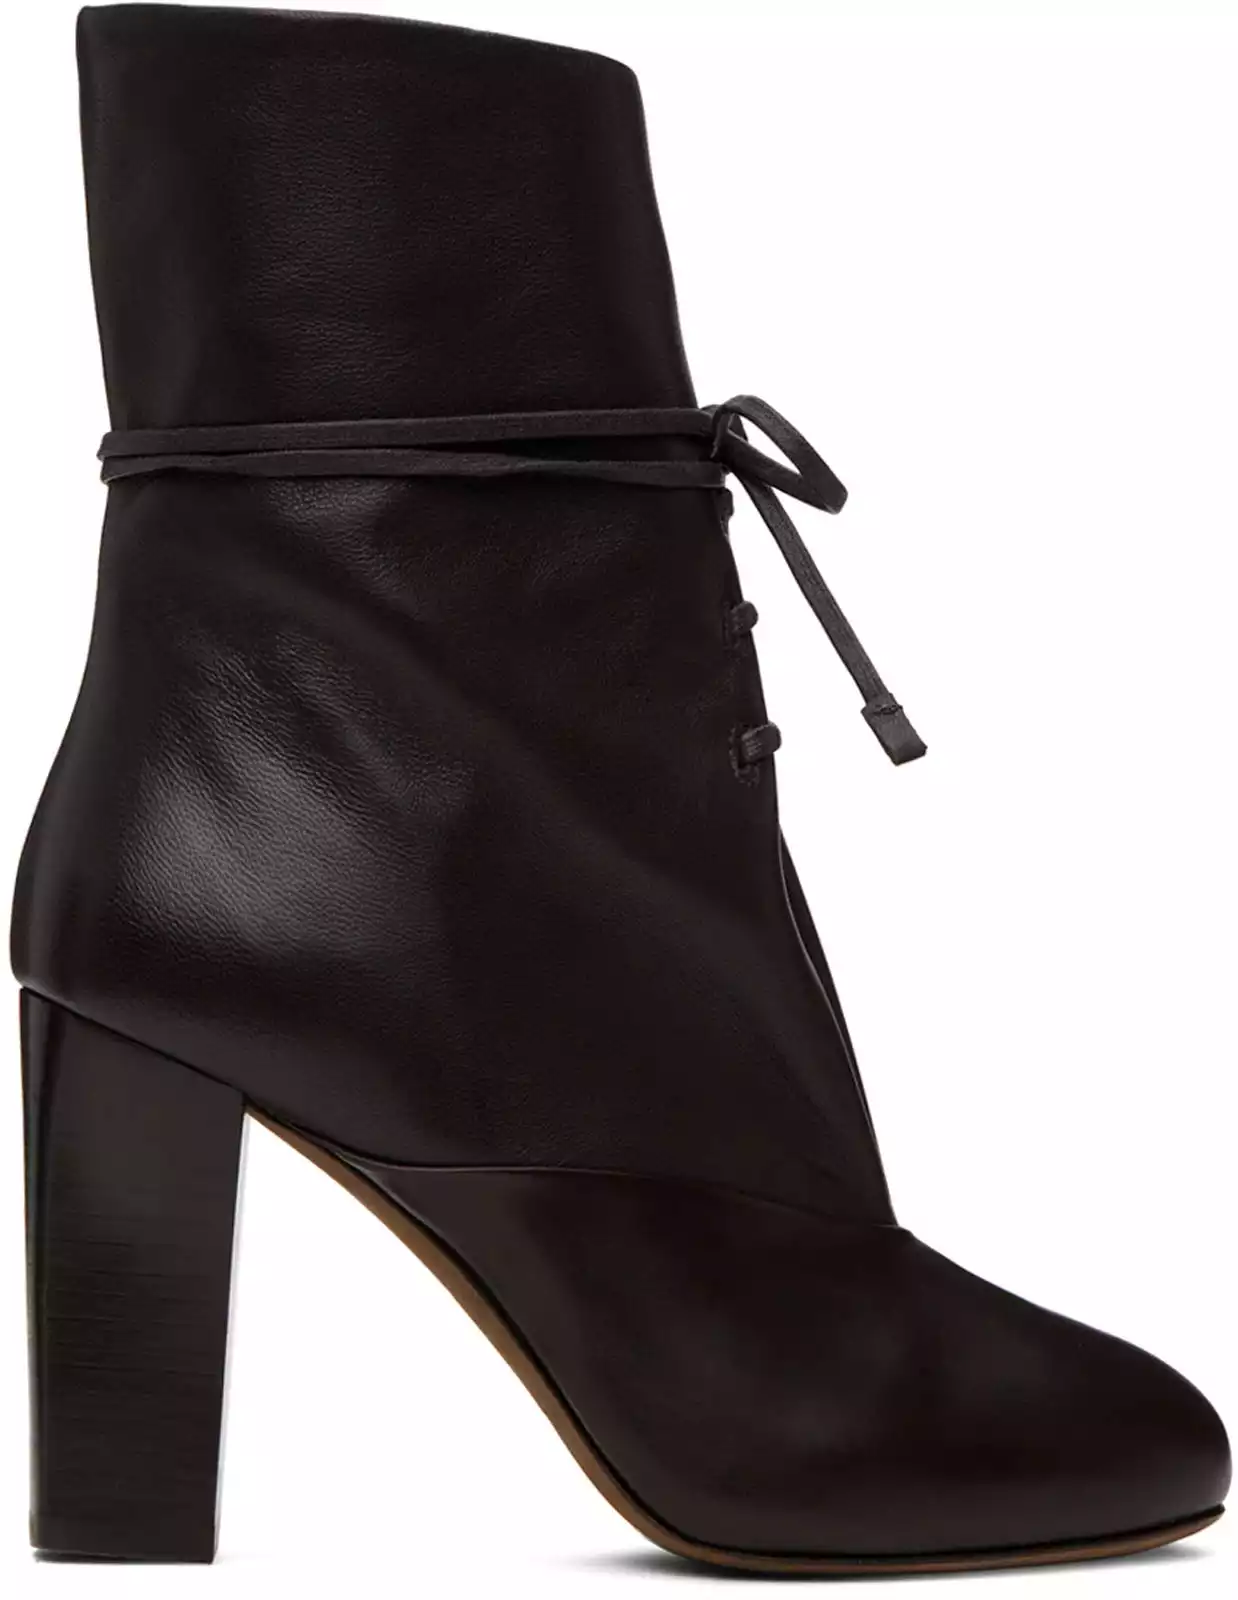 LEMAIRE: Brown Round Toe Laced Boots | SSENSE